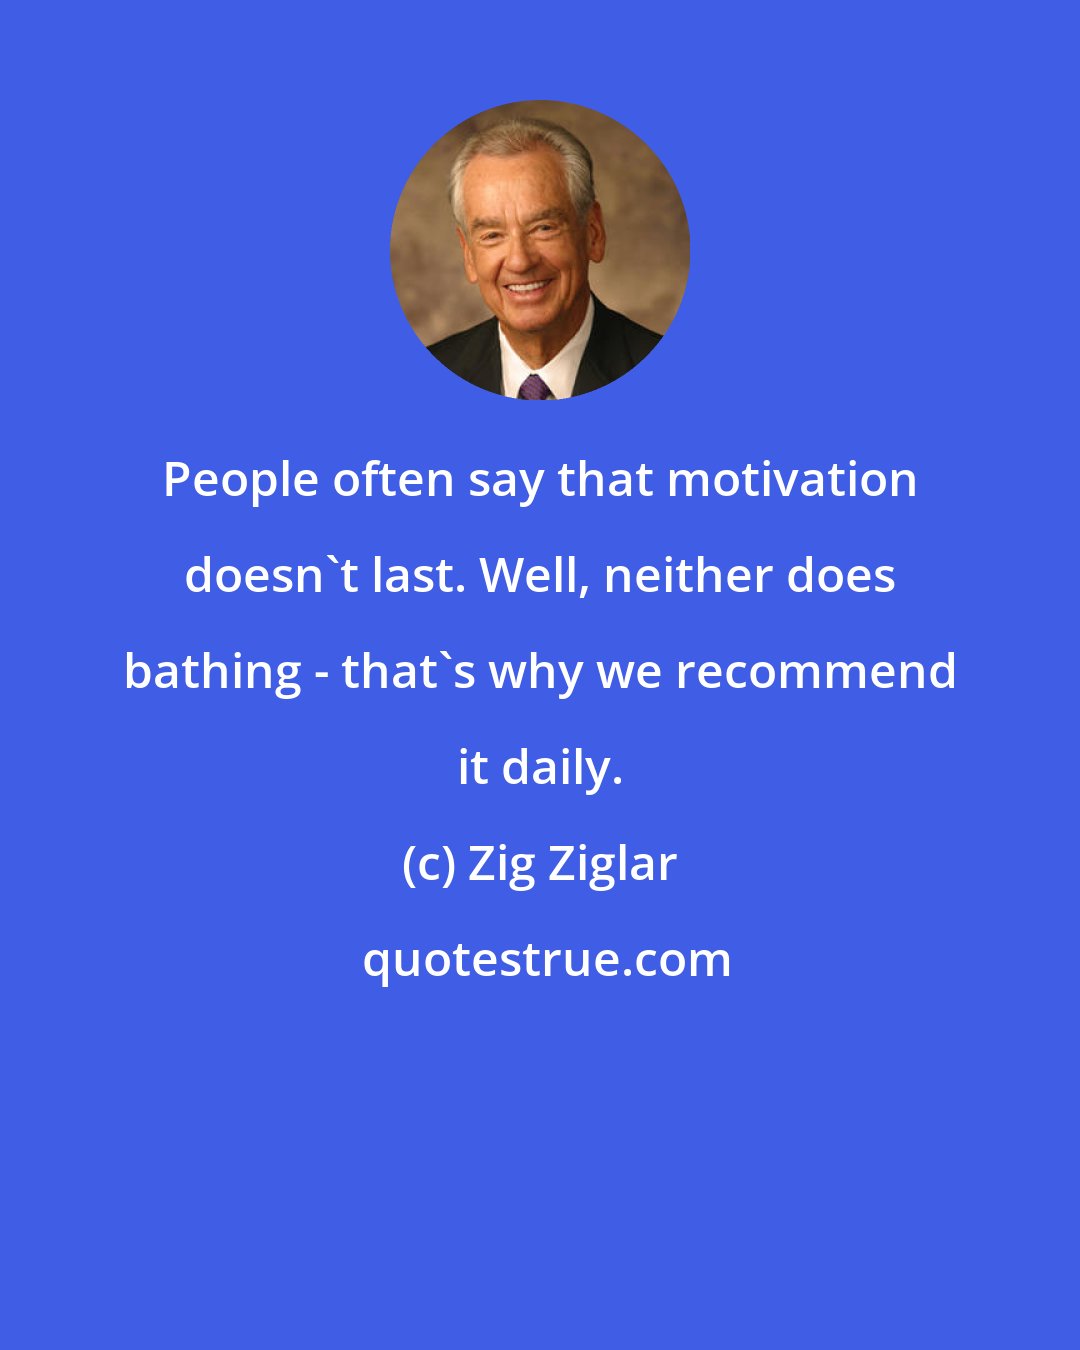 Zig Ziglar: People often say that motivation doesn't last. Well, neither does bathing - that's why we recommend it daily.